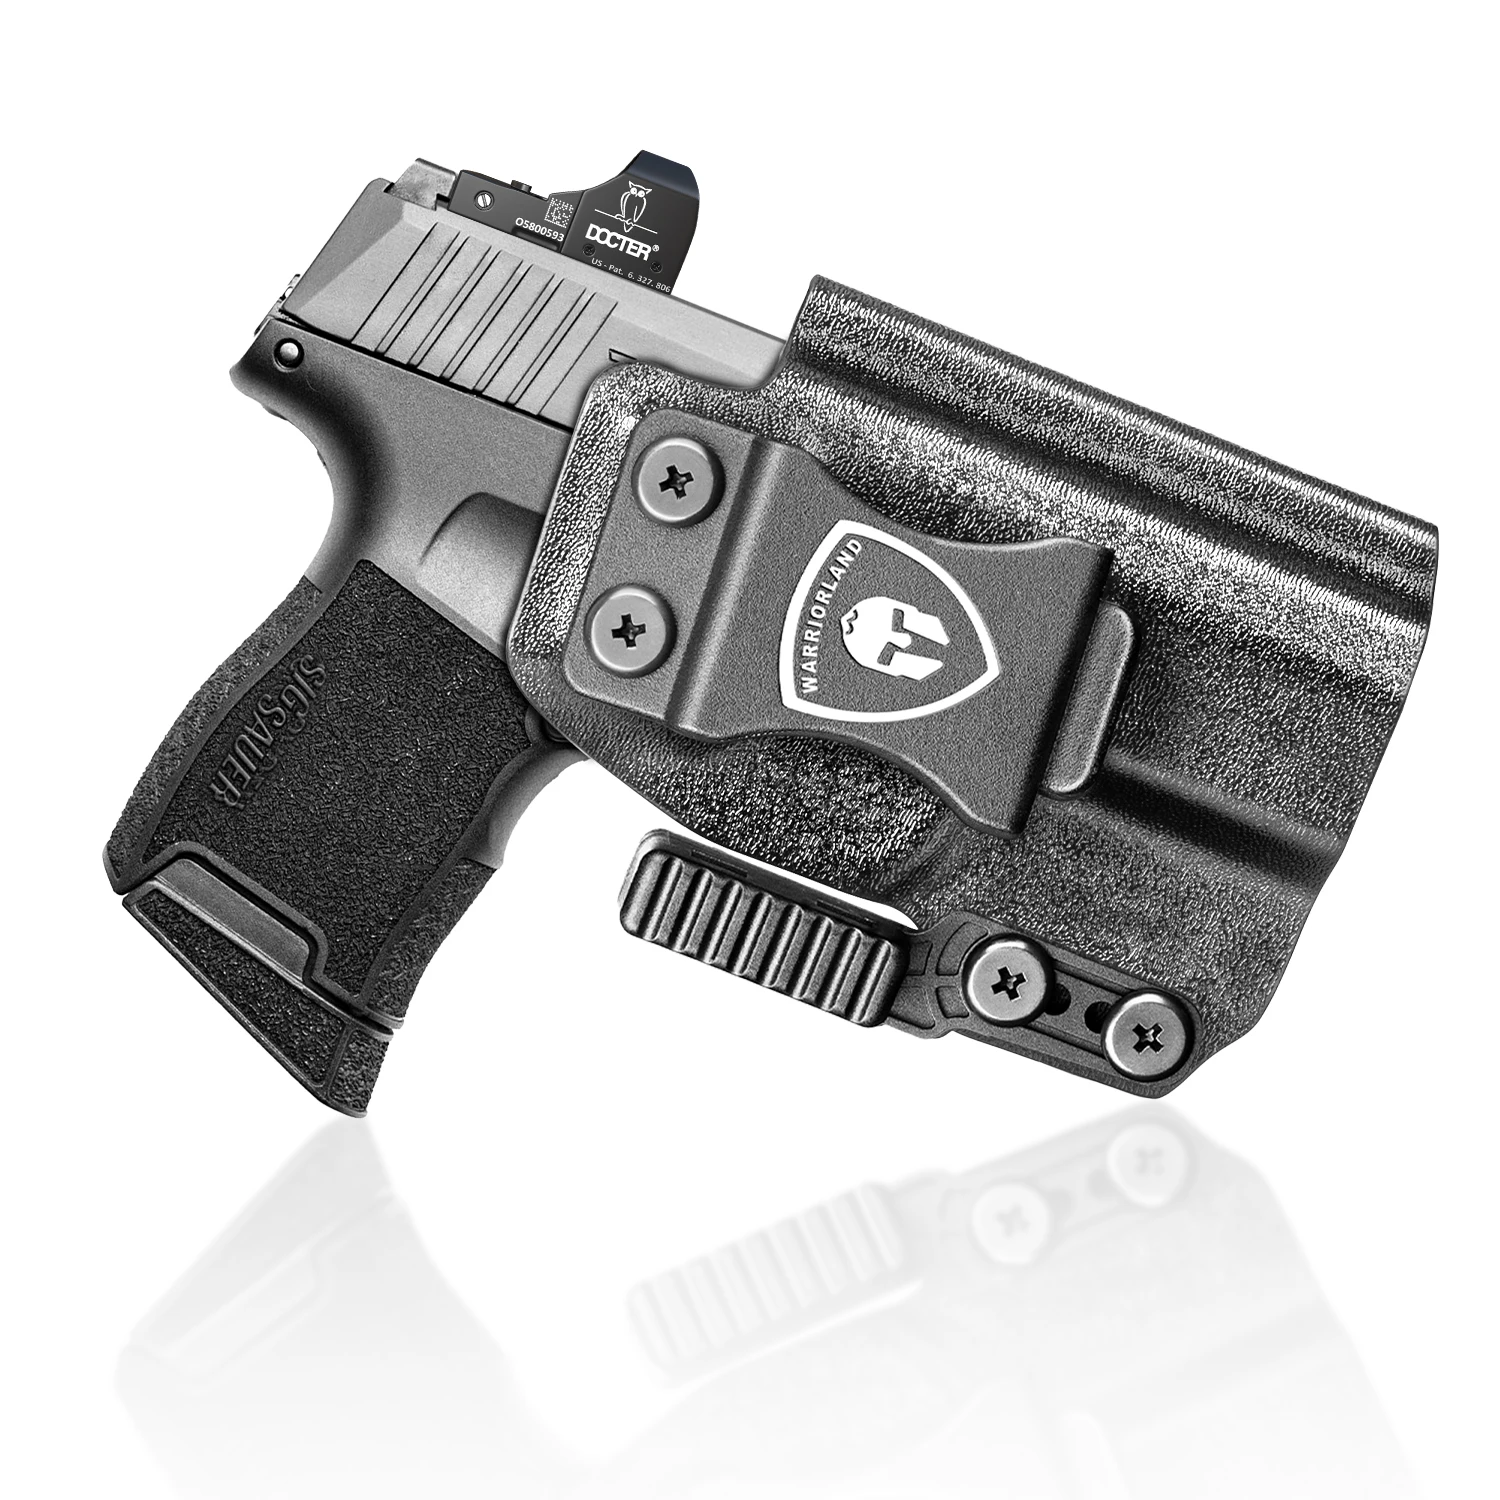 

Sig P365 Holster IWB Kydex Holster Fit: Sig Sauer P365 / P365X / P365 SAS Pistol Inside Waistband with Claw Optic Cut Right Hand